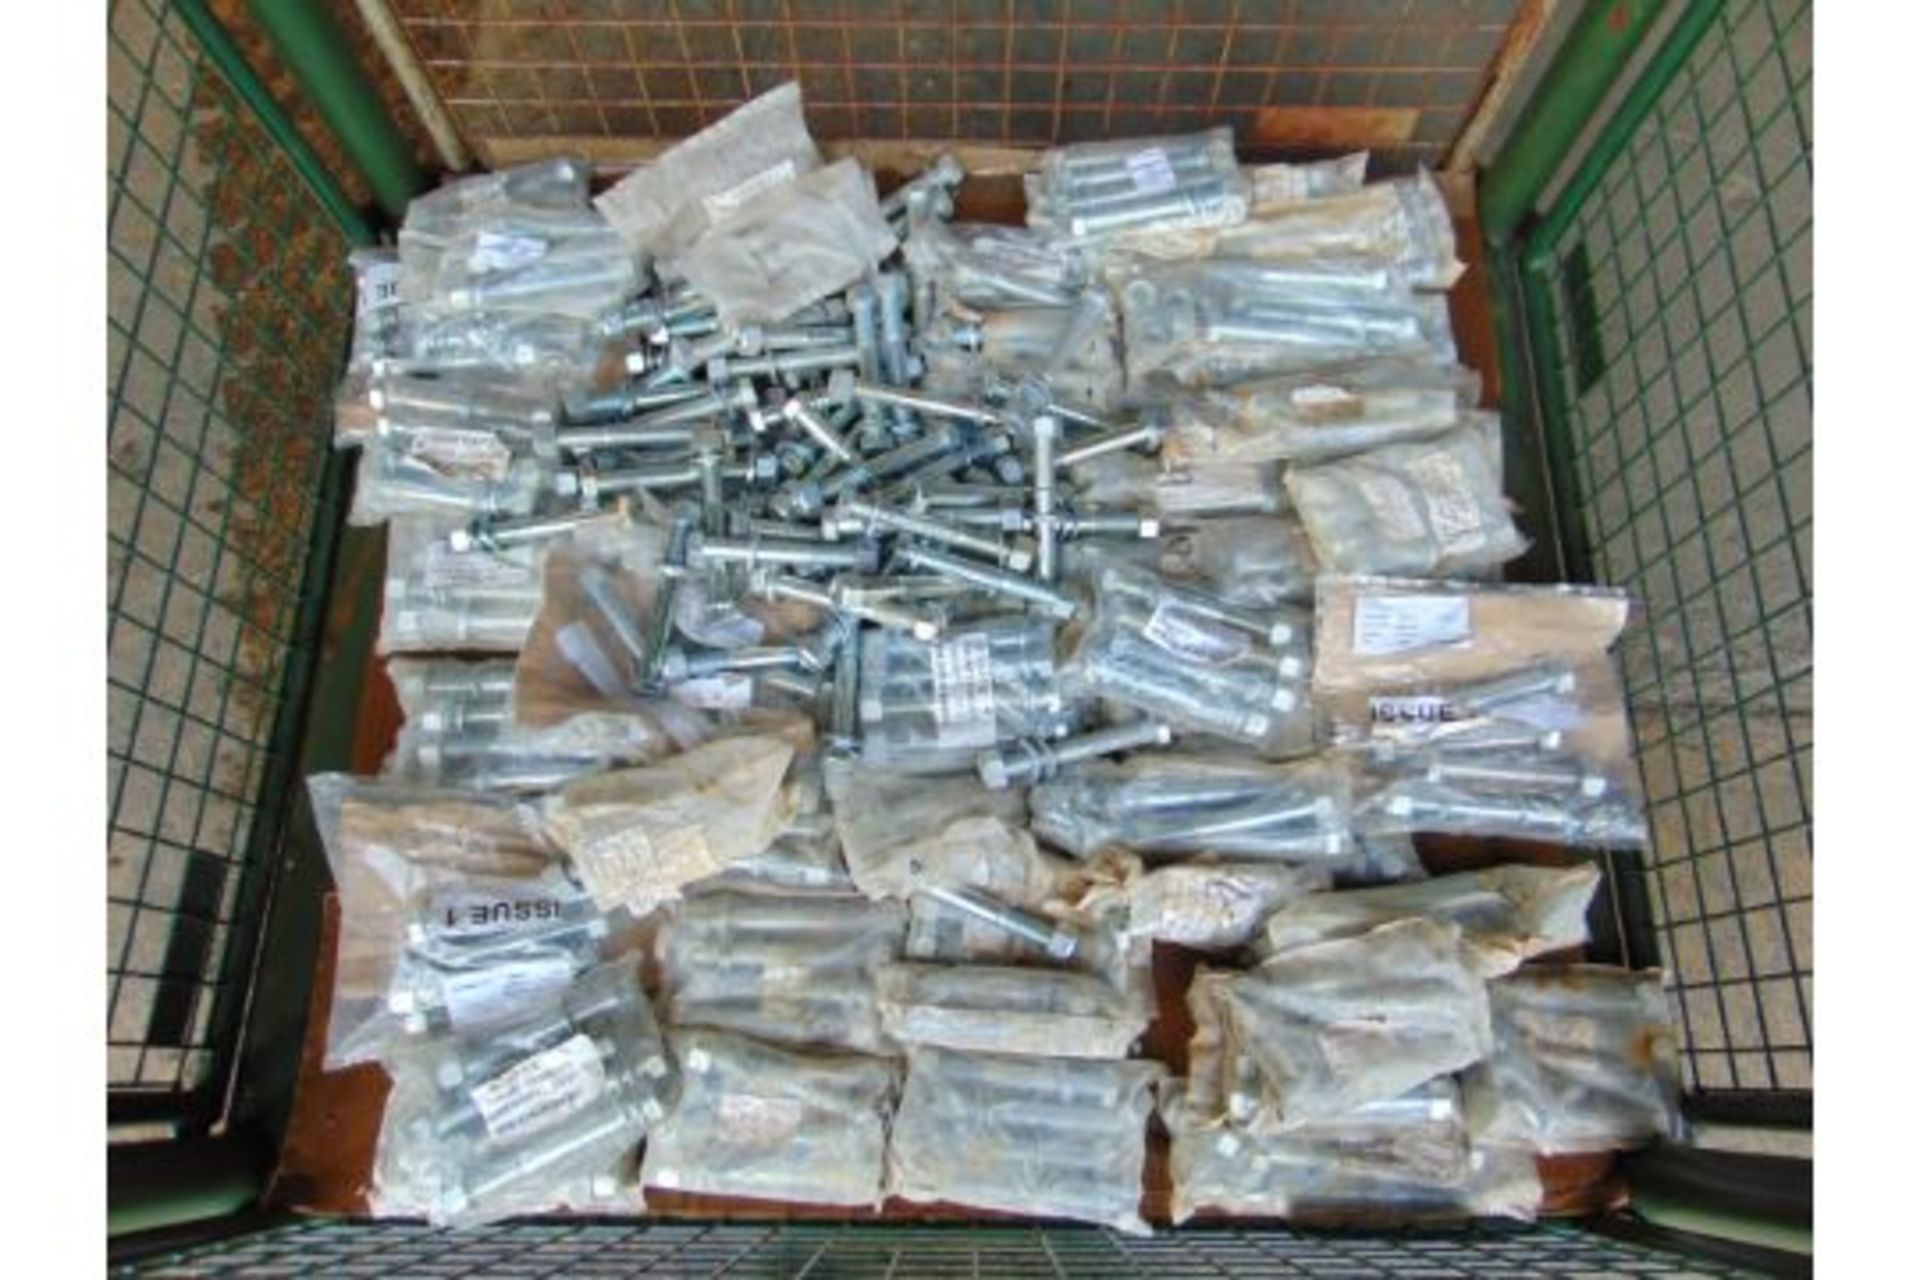 Approx. 250 M20 x 150 Grade 8.8 Bolts, Washers & Nuts